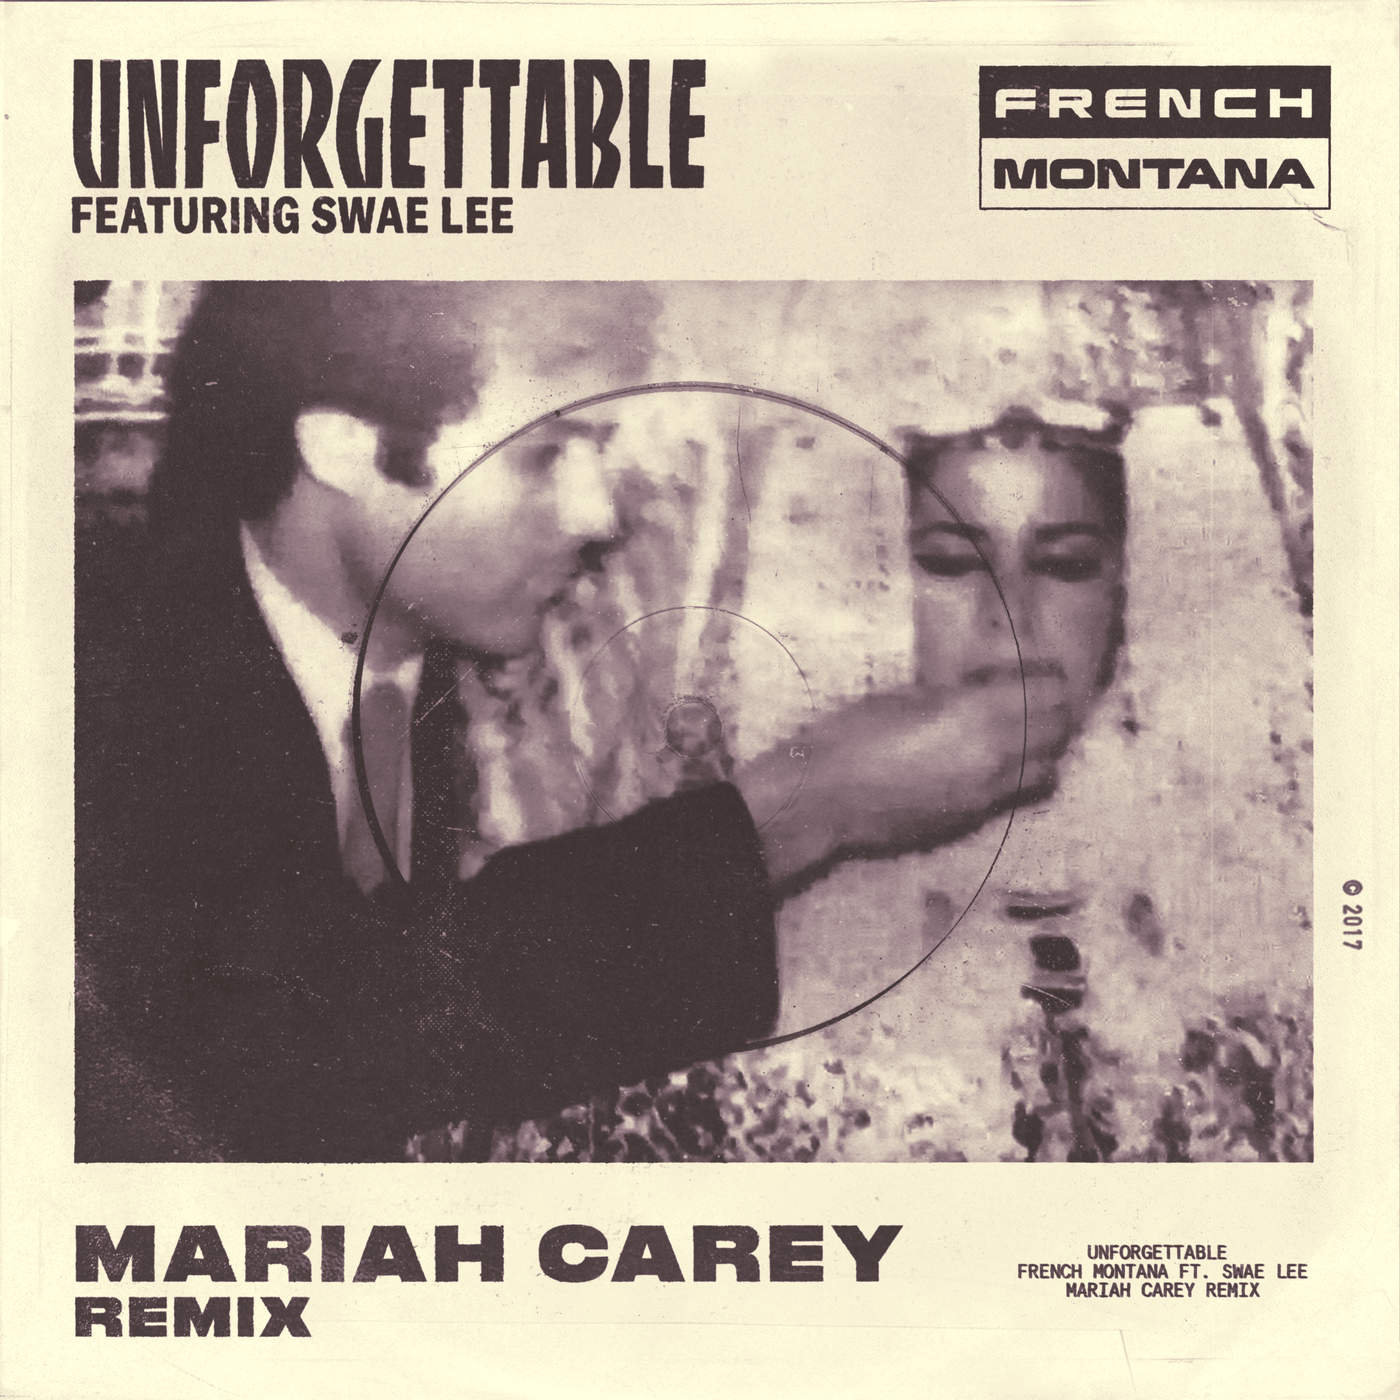 French Montana - Unforgettable (Remix) Feat. Swae Lee & Mariah Carey [New Song]